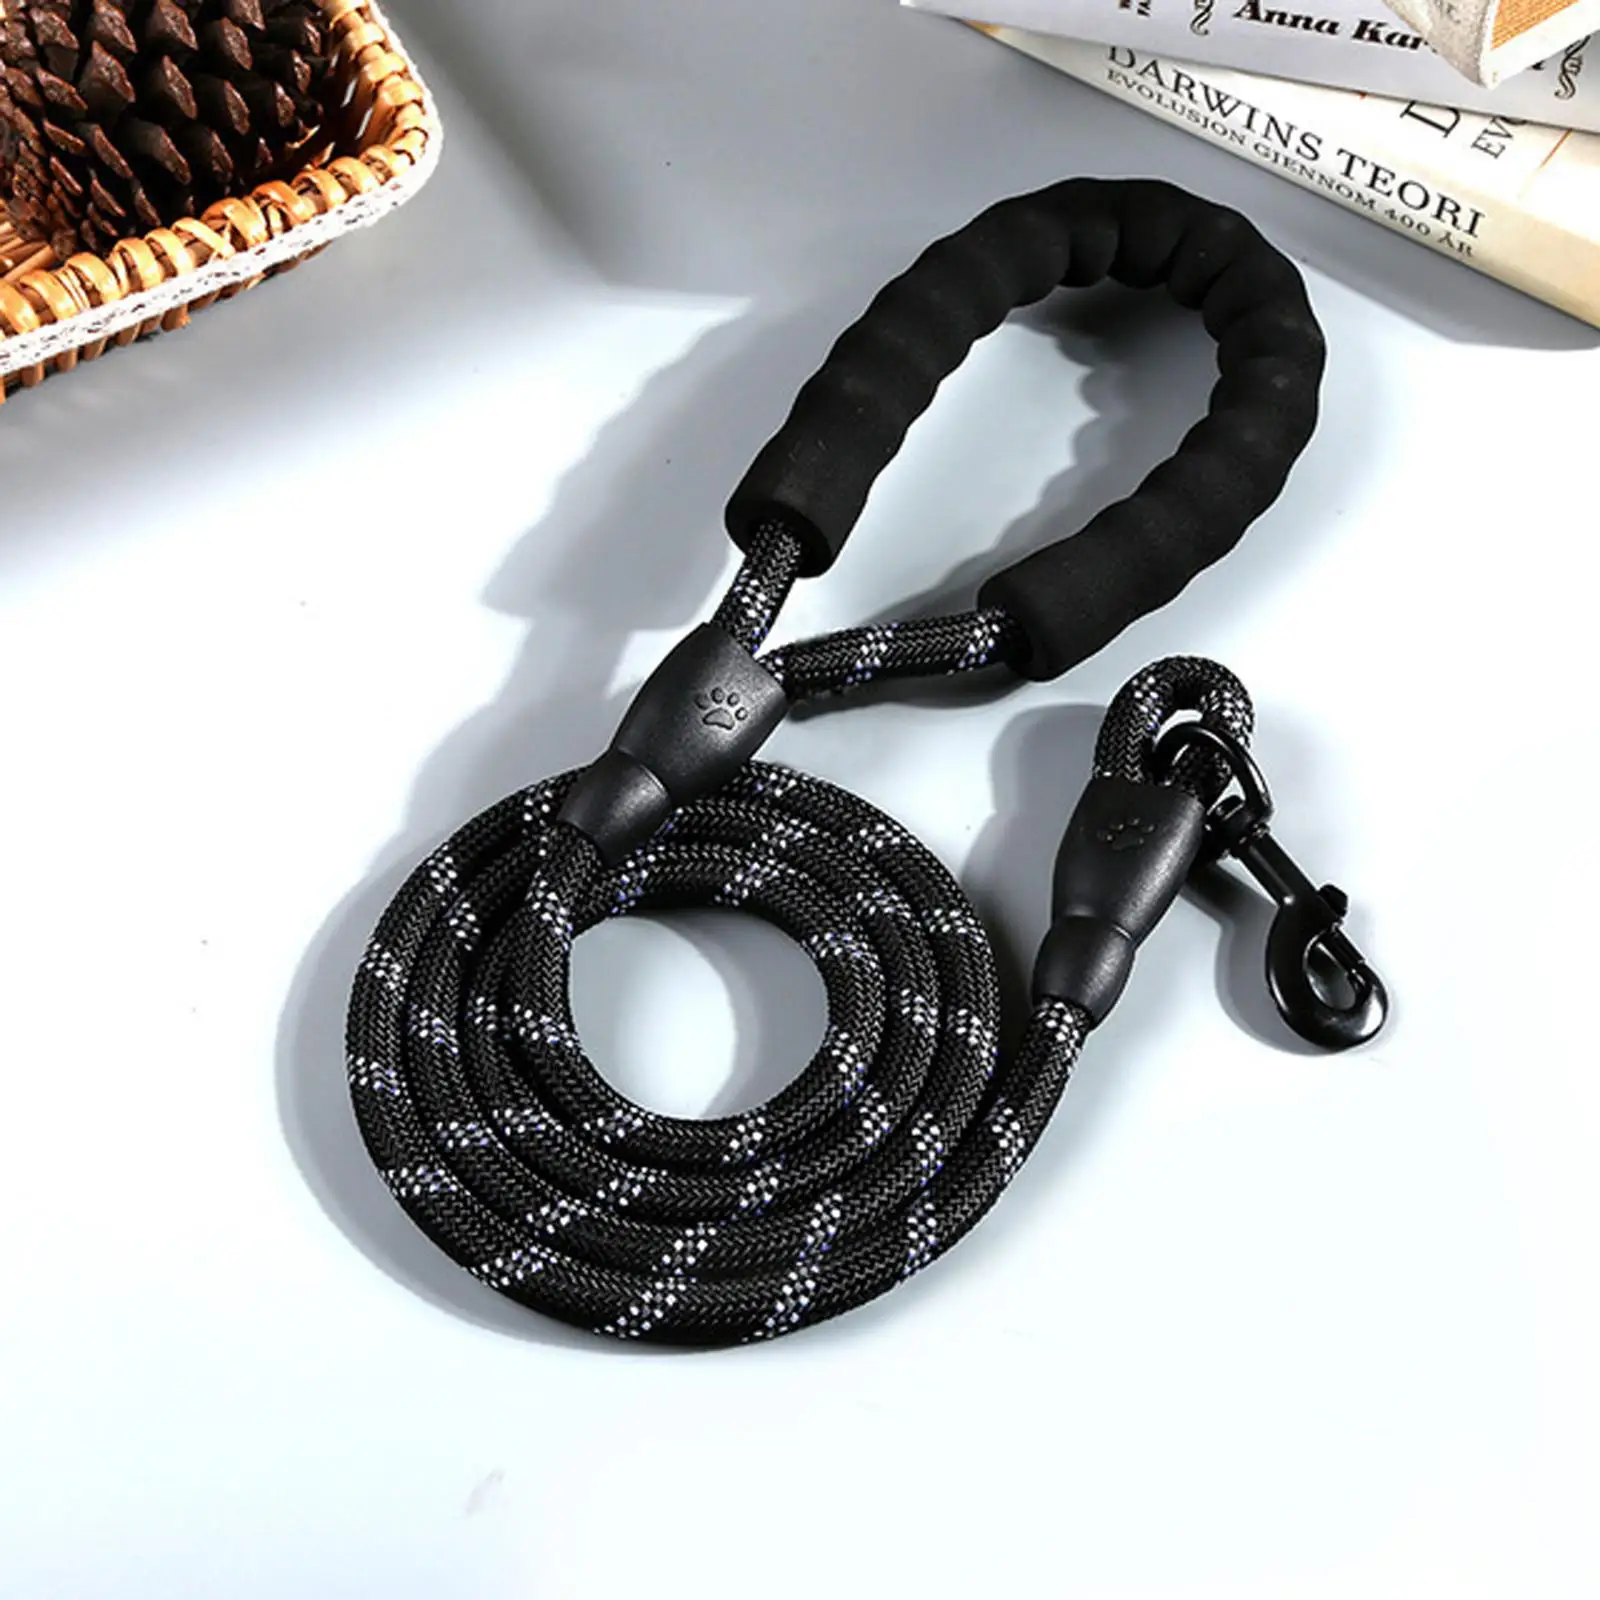 

Leash for Dog Accessories Dog Harness for Small Dogs Pet Collars |-f-| Harnesses and Leashes Pets Chain Supplies Products Home